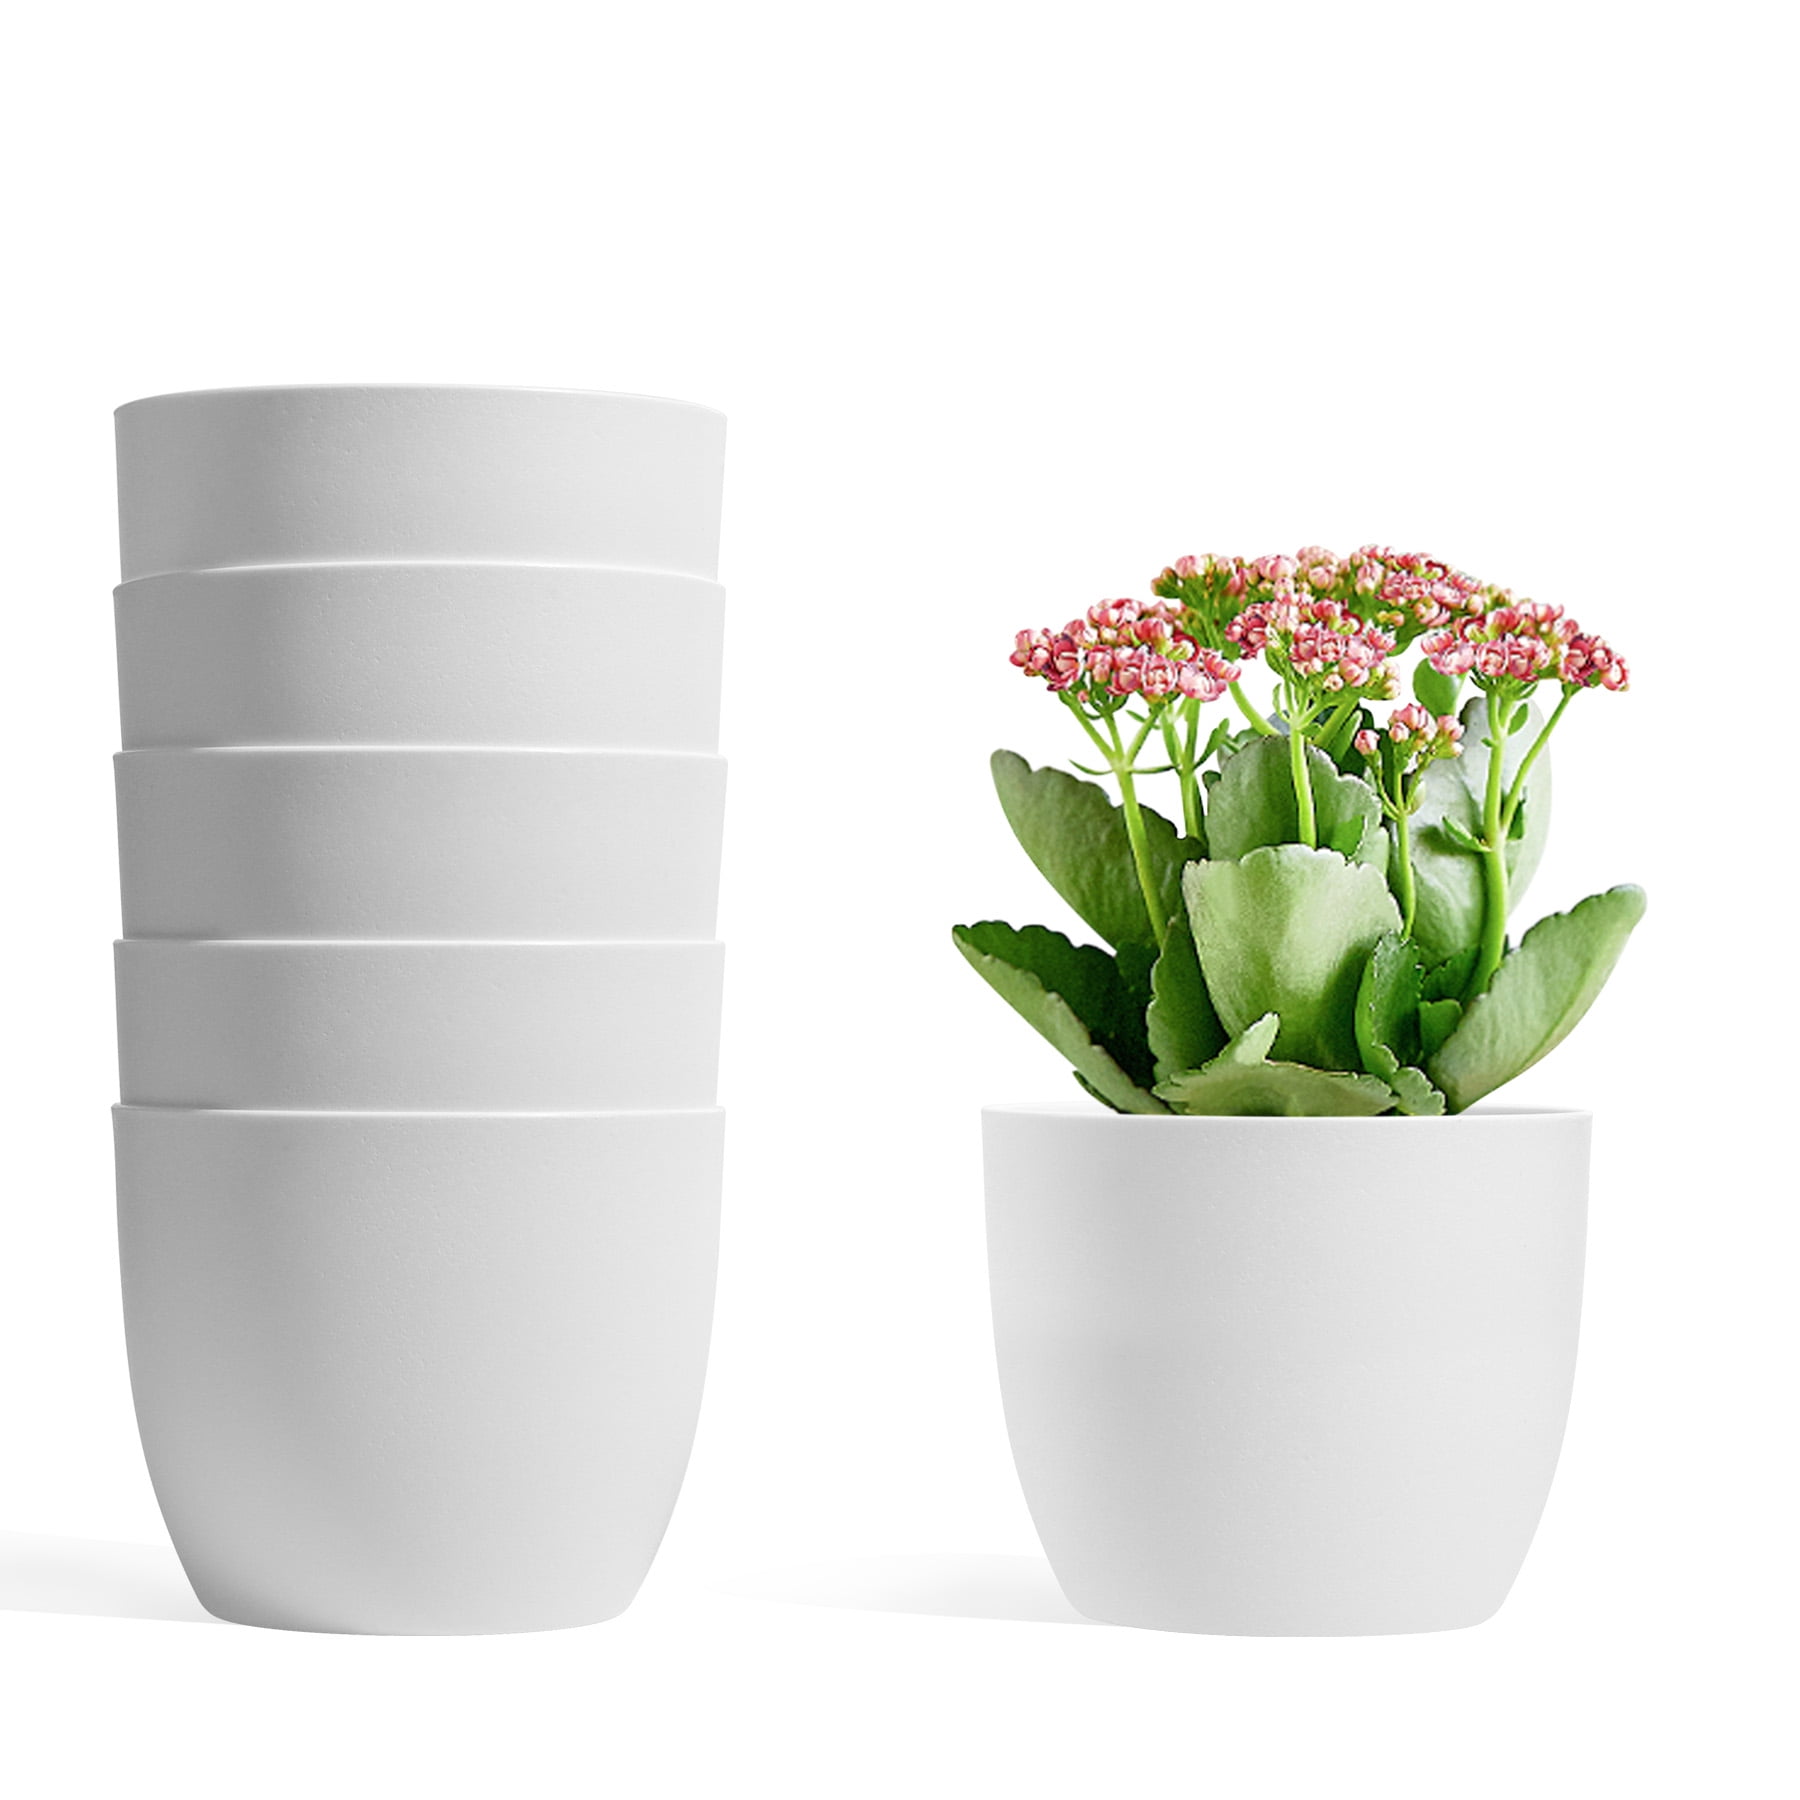 Herbs African Violets Matte White Aloe T4U 5.5 Inch Self Watering Plastic Planter with Water Level Indicator Pack of 6 Modern Decorative Planter Flower Pot for House Plants Succulents and More 